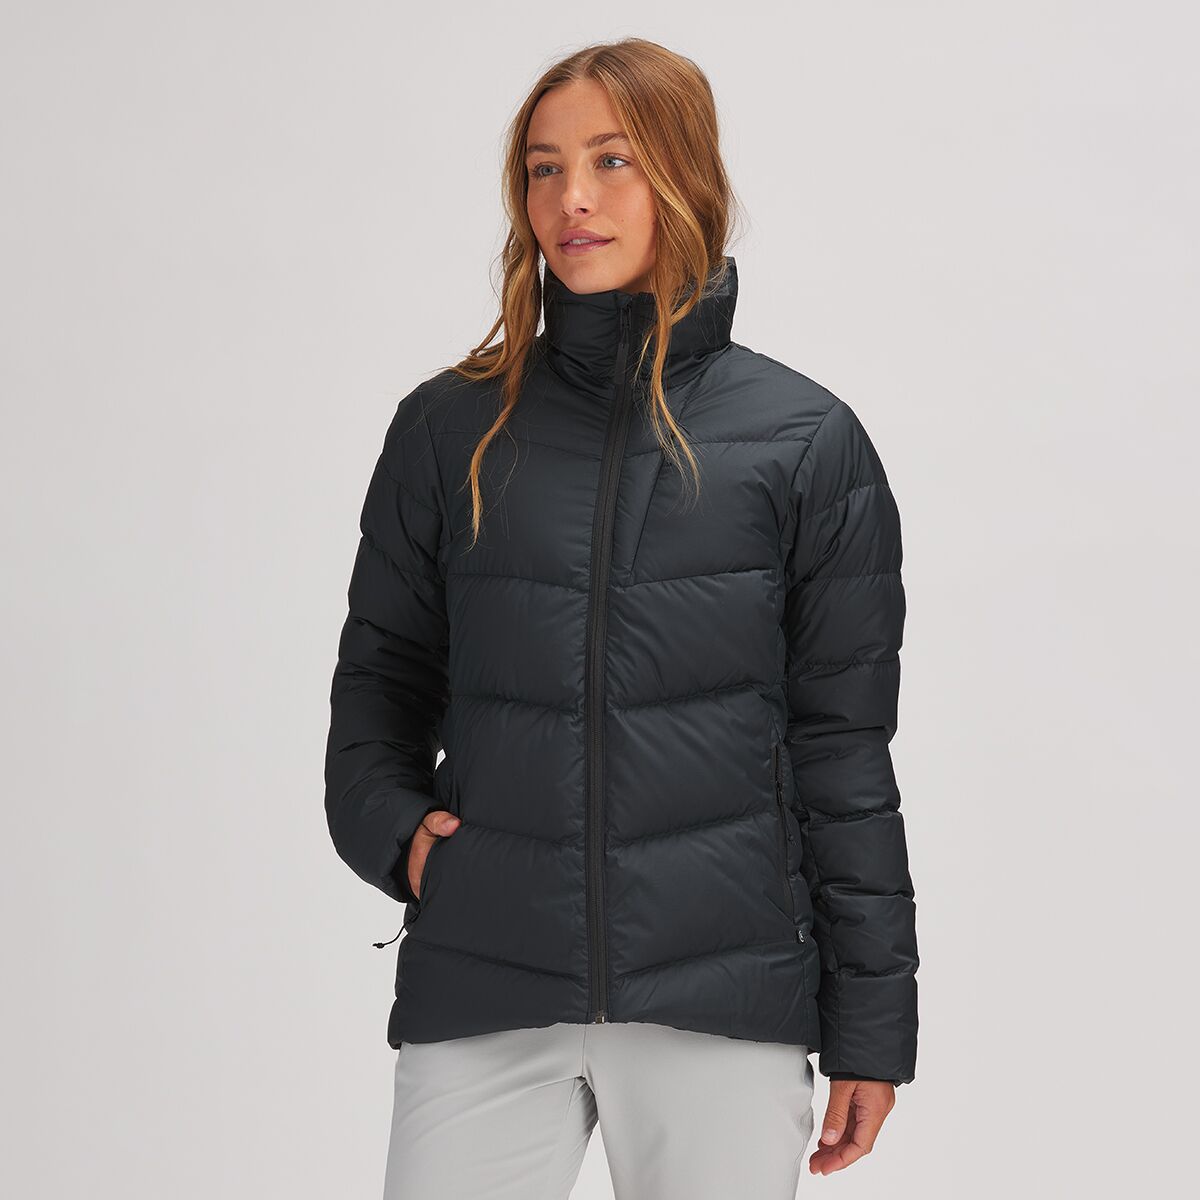 Backcountry ALLIED Down Jacket - Women's - Clothing